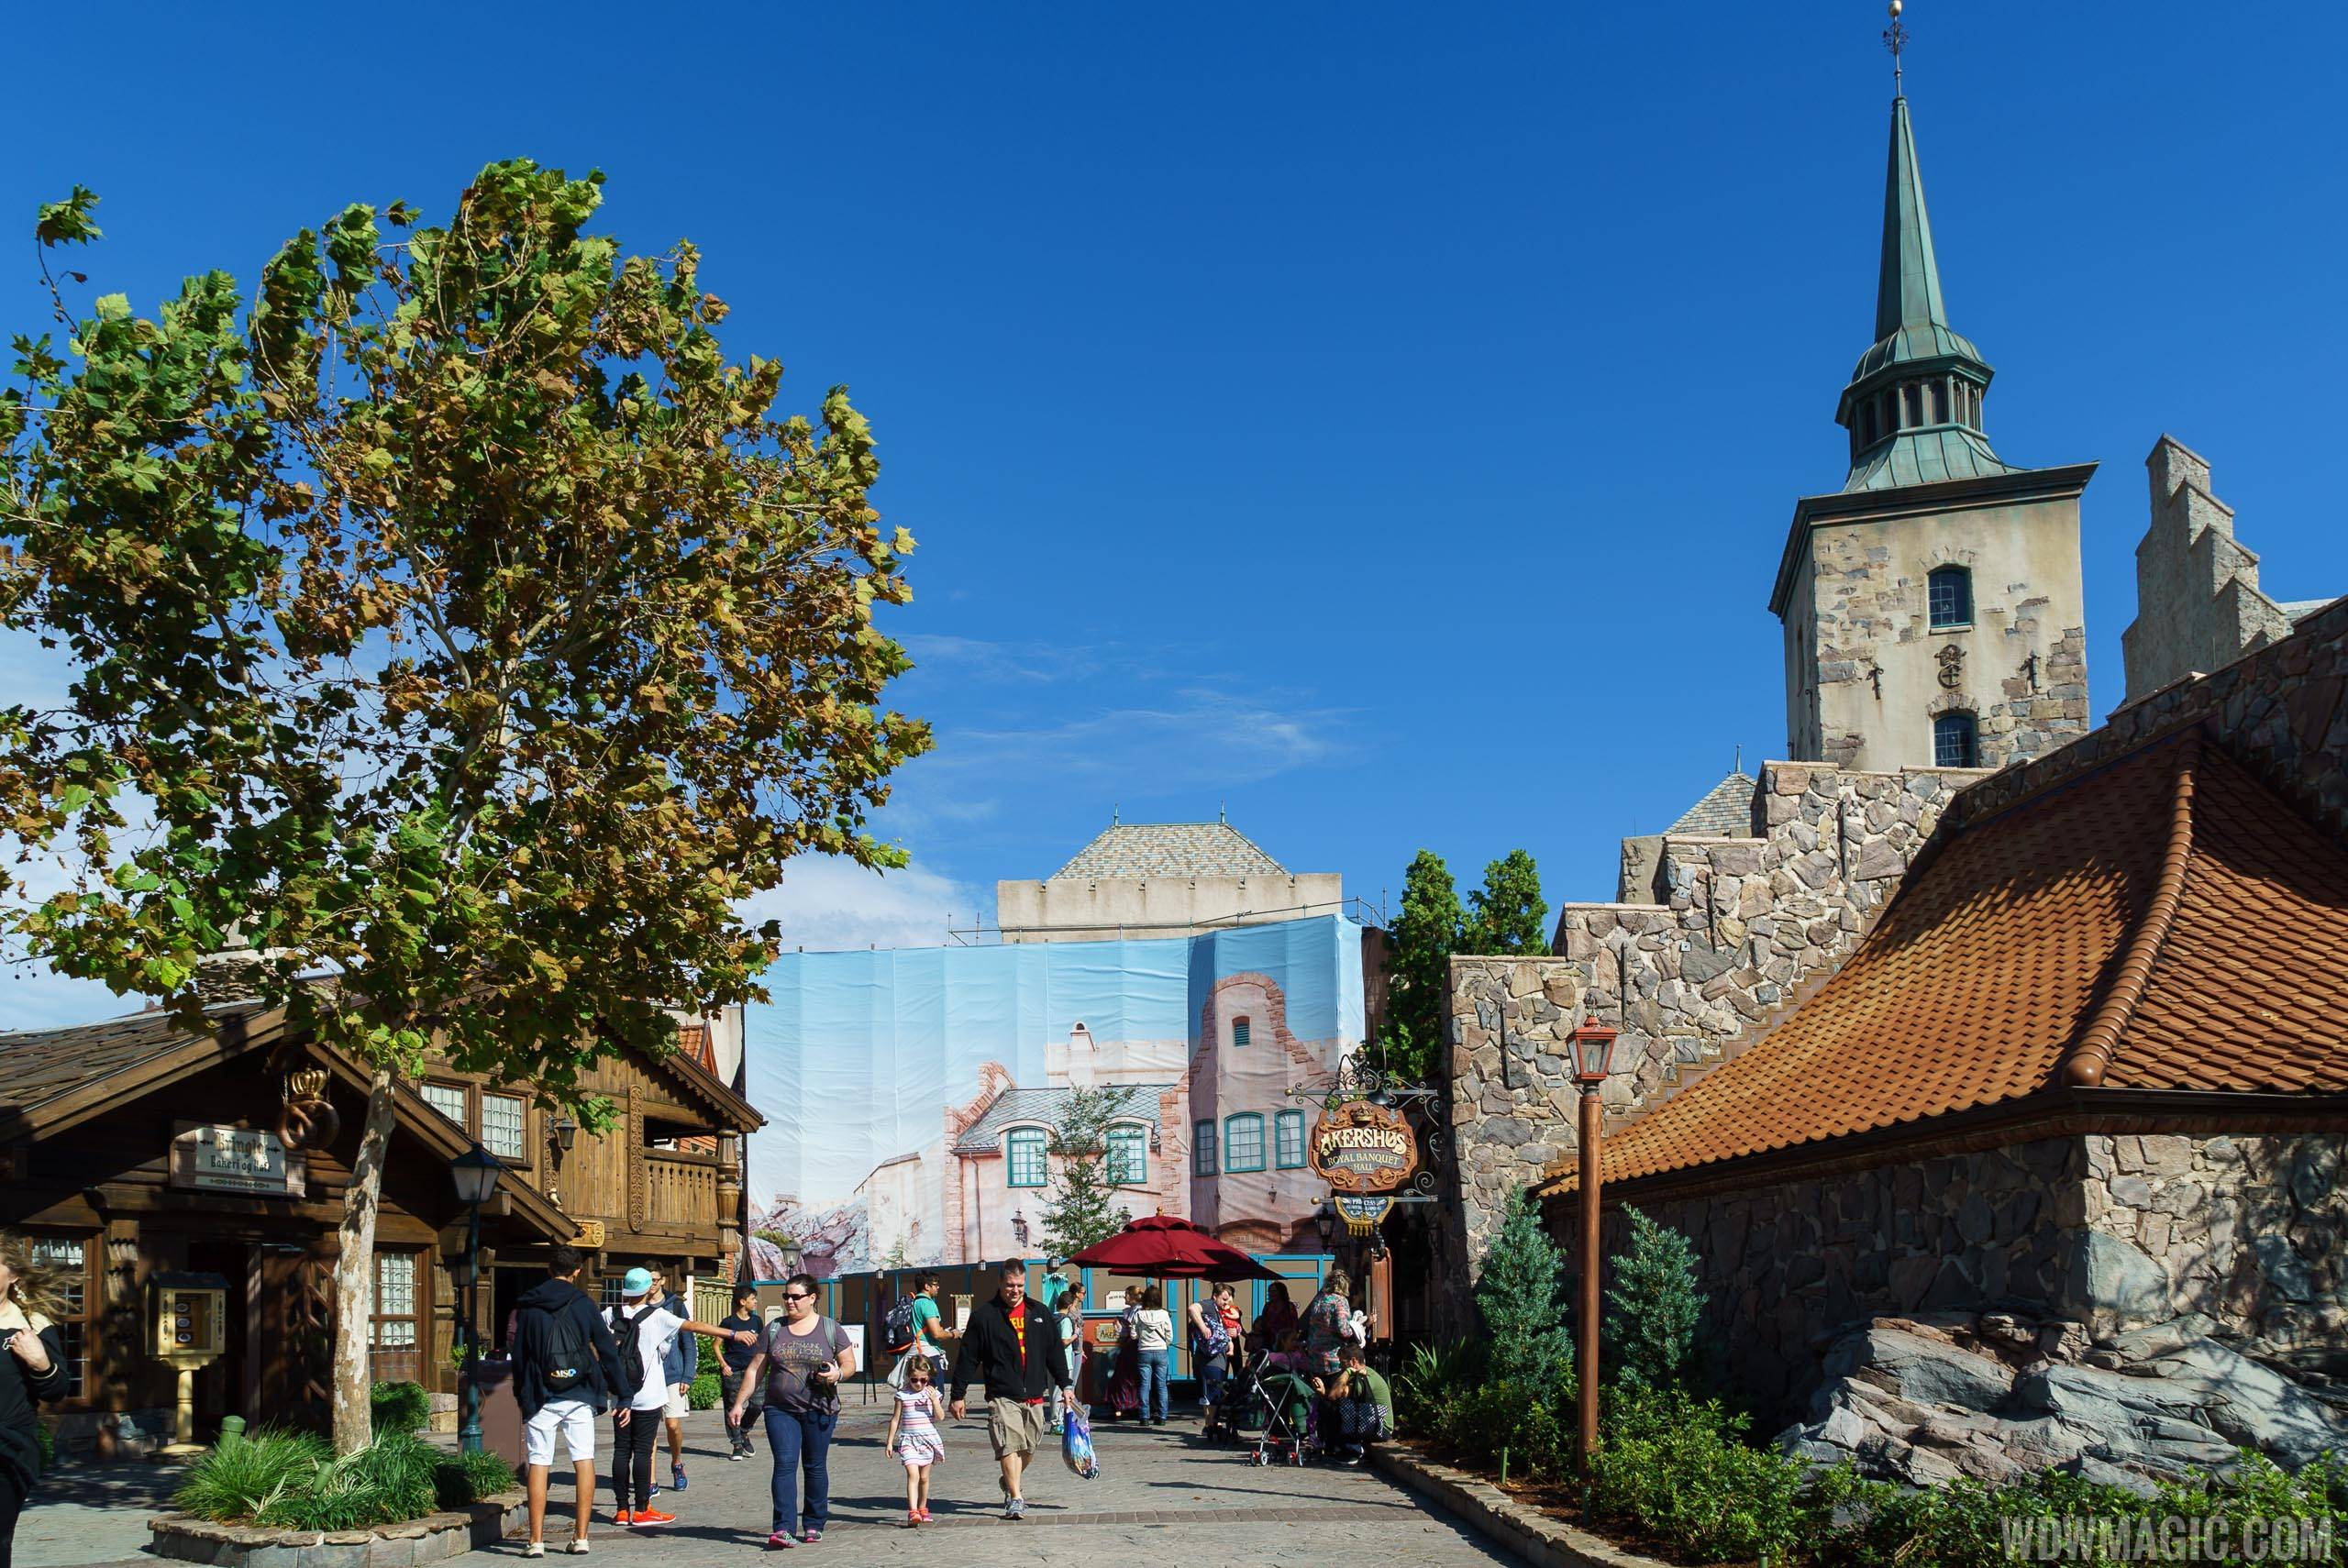 Frozen Ever After and Royal Sommerhus construction